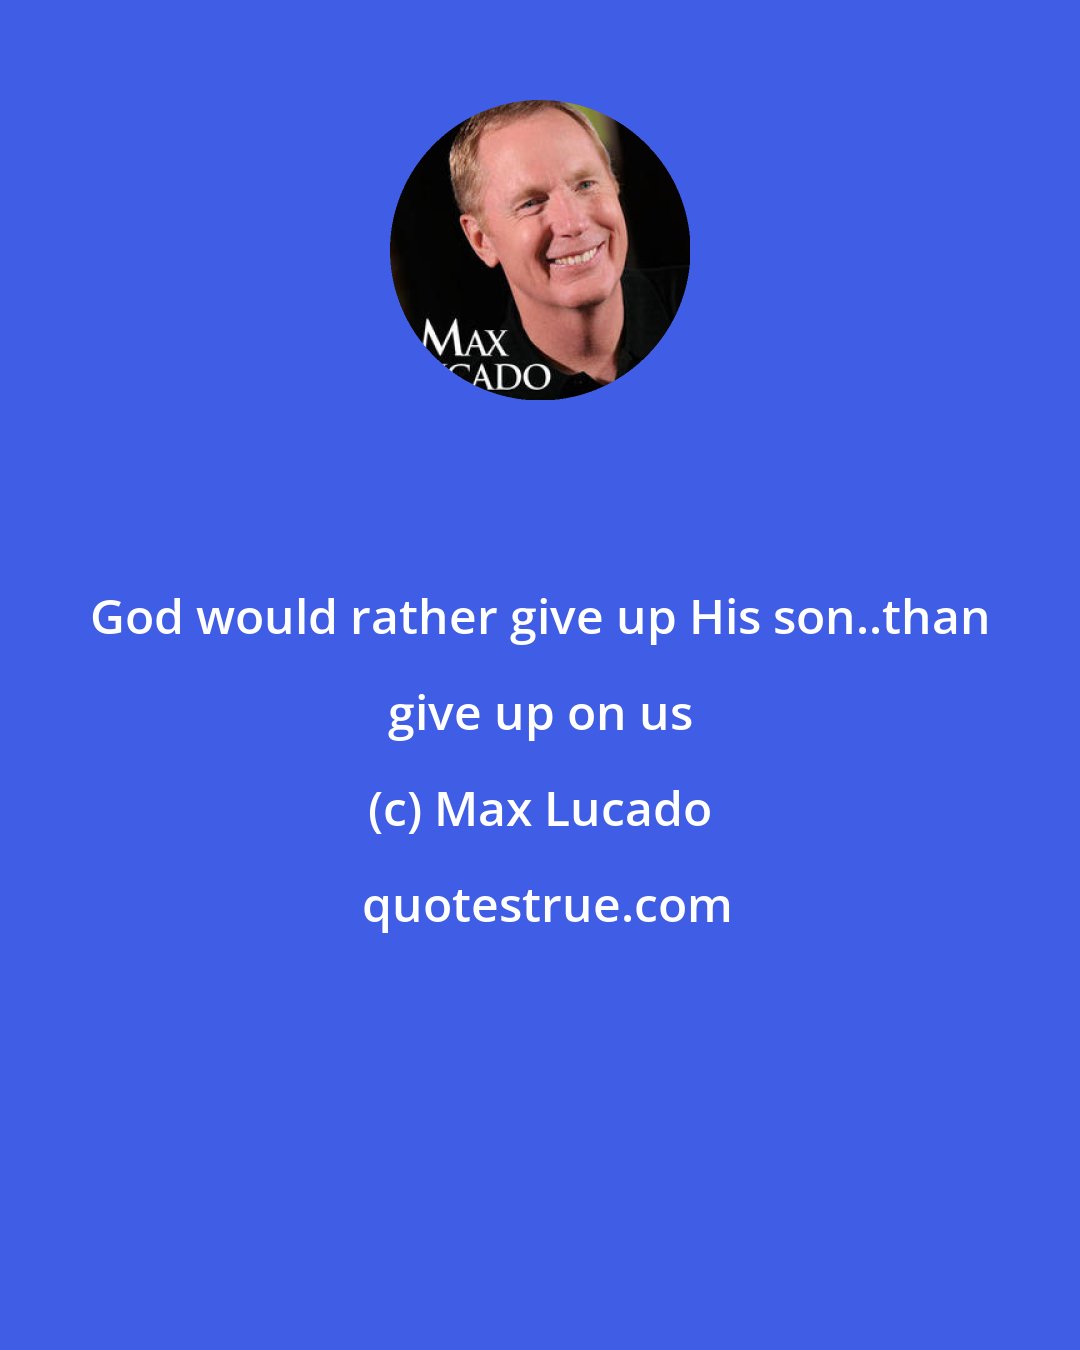 Max Lucado: God would rather give up His son..than give up on us